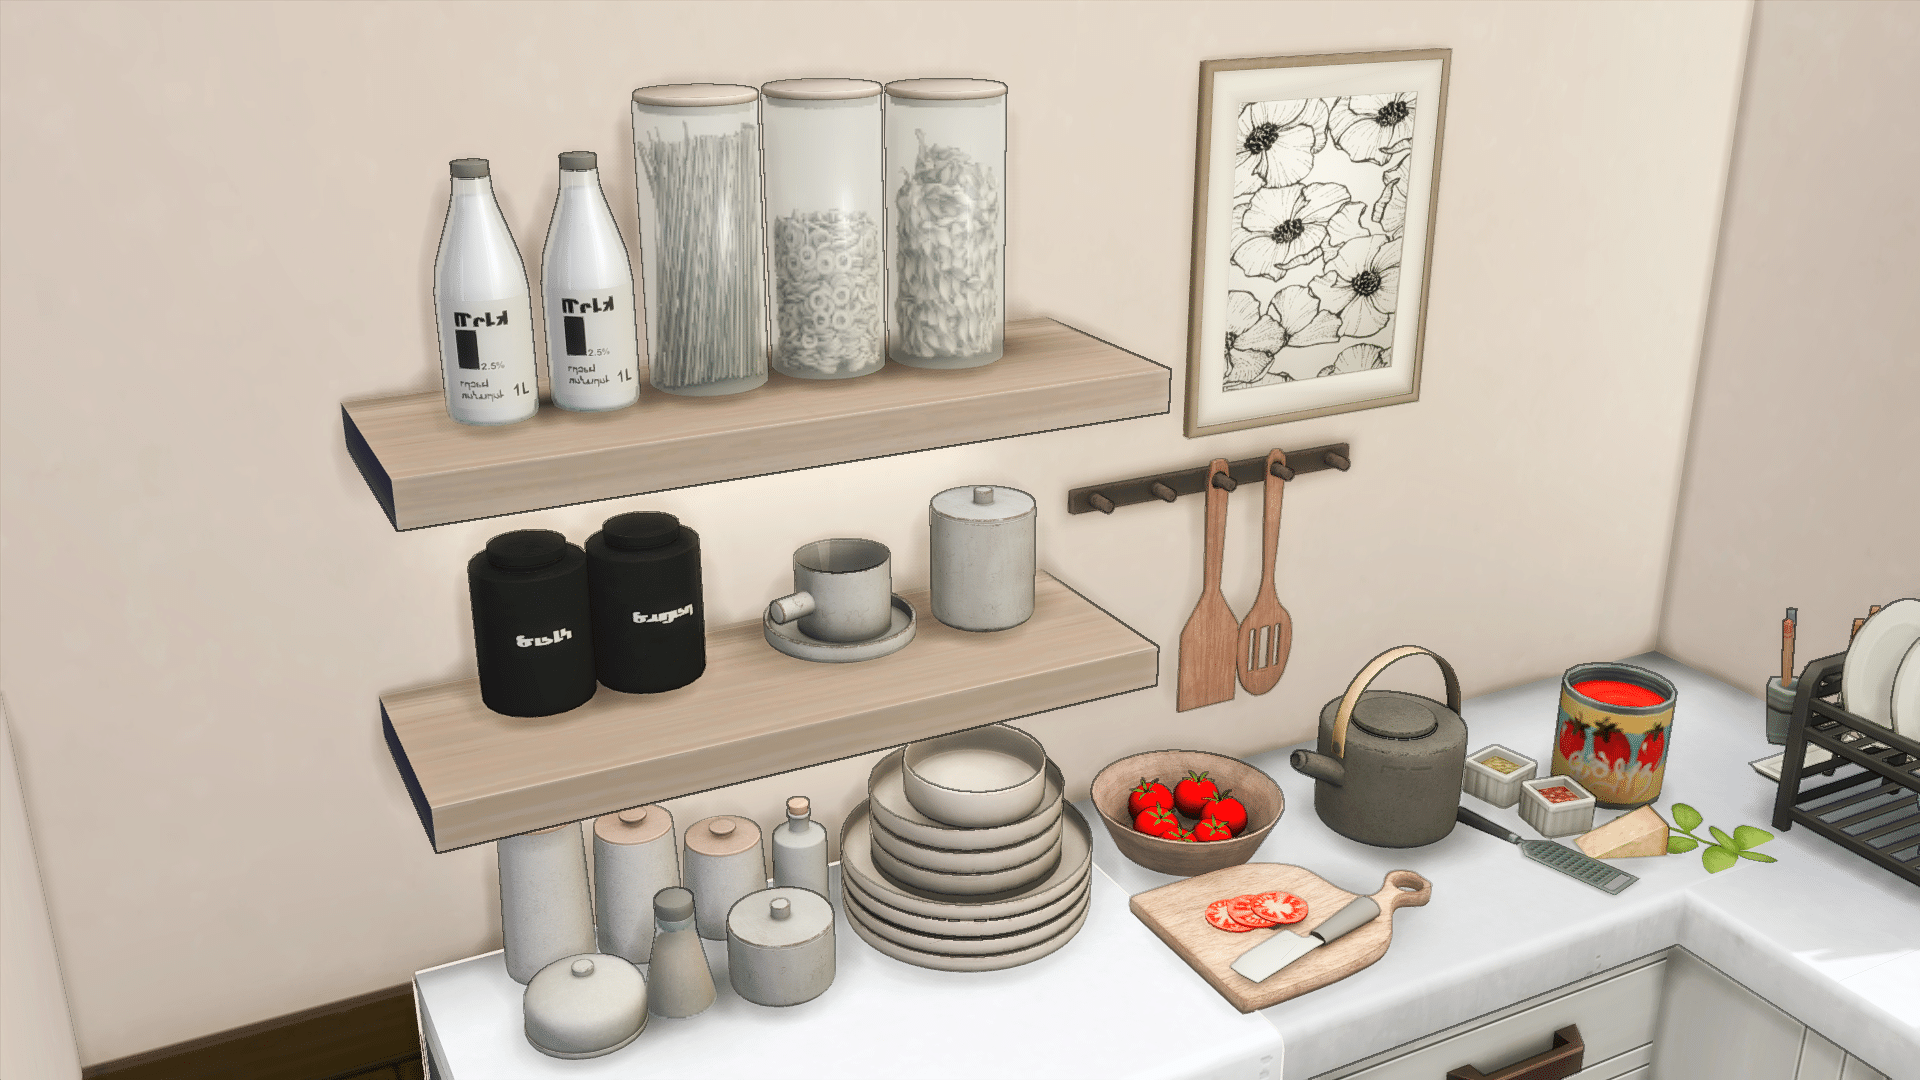 SNOOTYSIMS - Monohrome Kitchen Clutter ingame shot